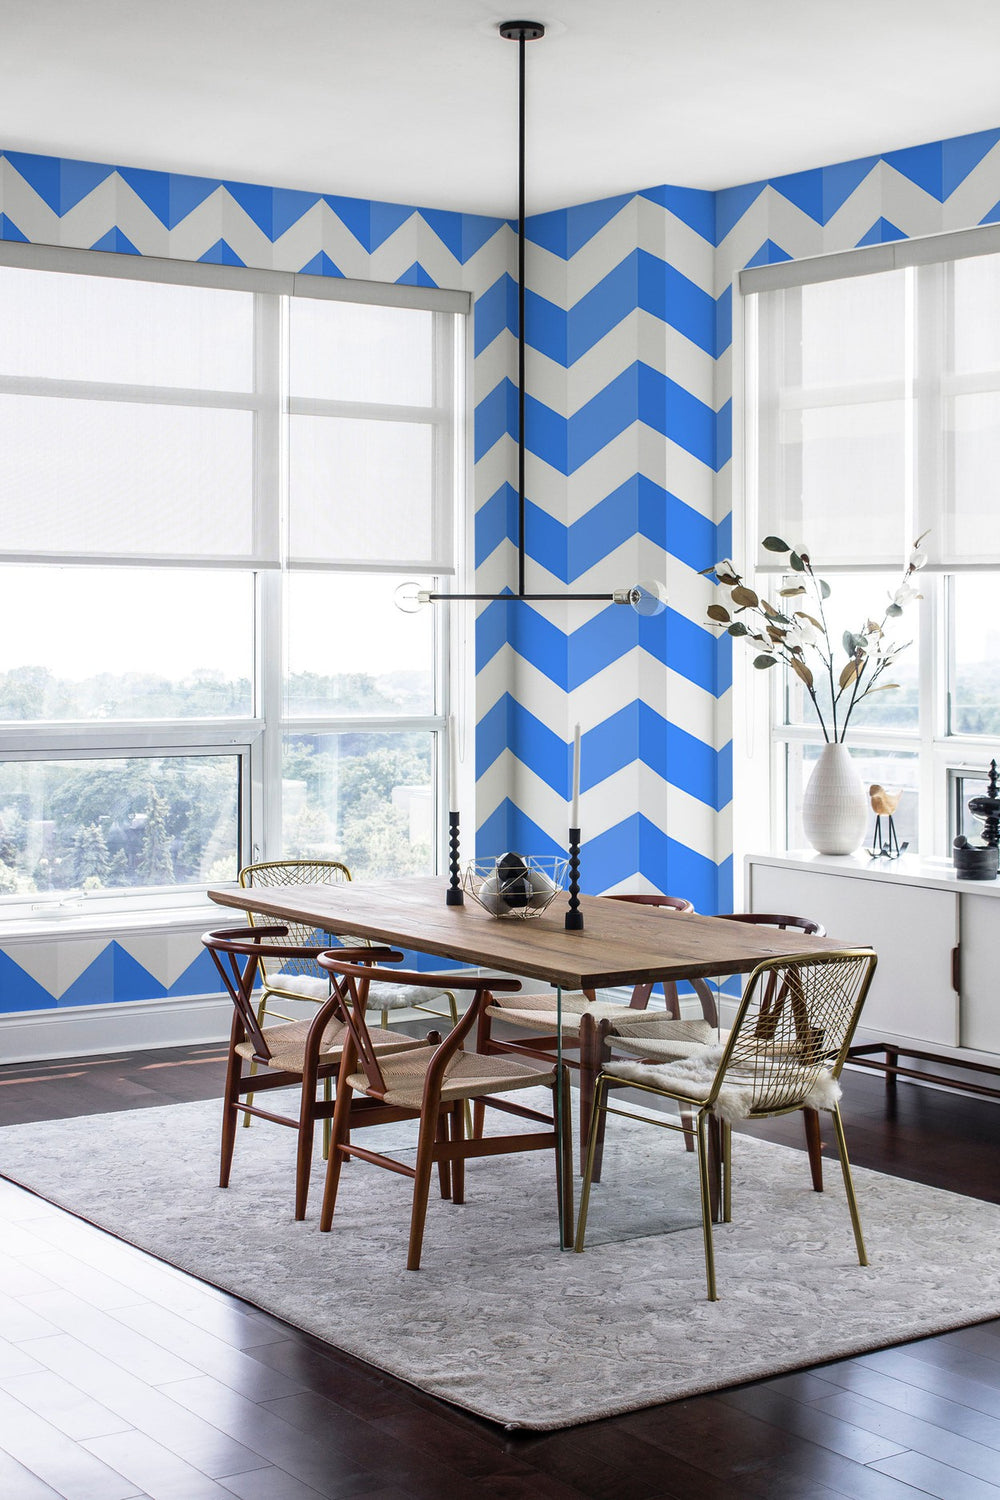 Contemporary dining room with a blue and white chevron pattern wall mural, wooden table, and stylish chairs.